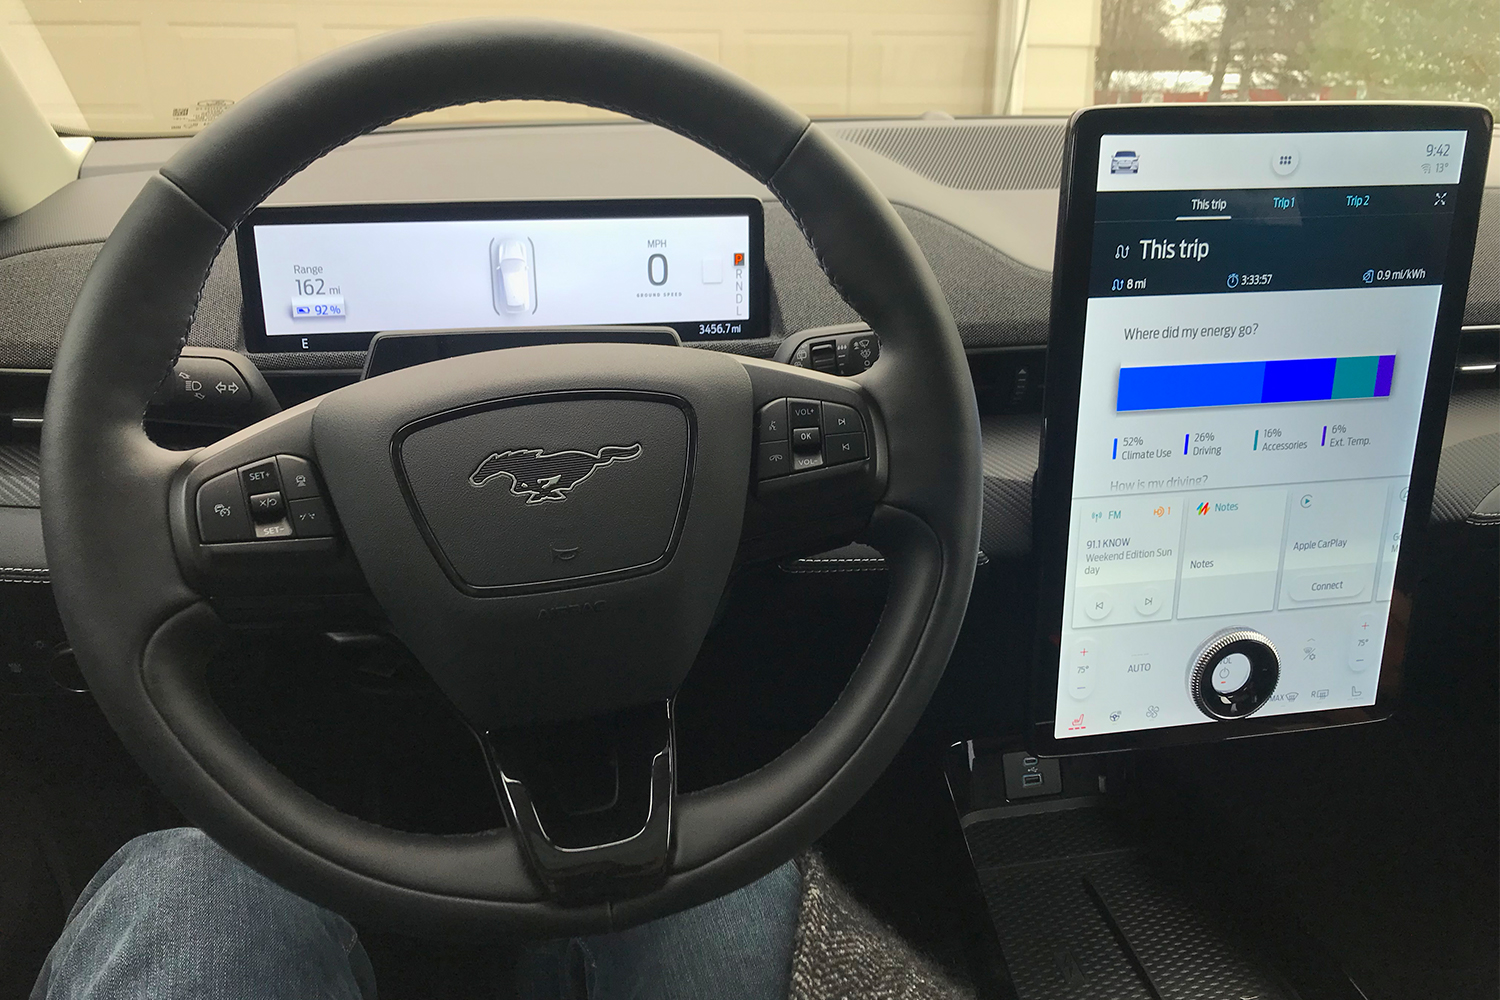 The dashboard of the 2021 Ford Mustang Mach-E electric crossover SUV, including the heated steering wheel and giant touchscreen